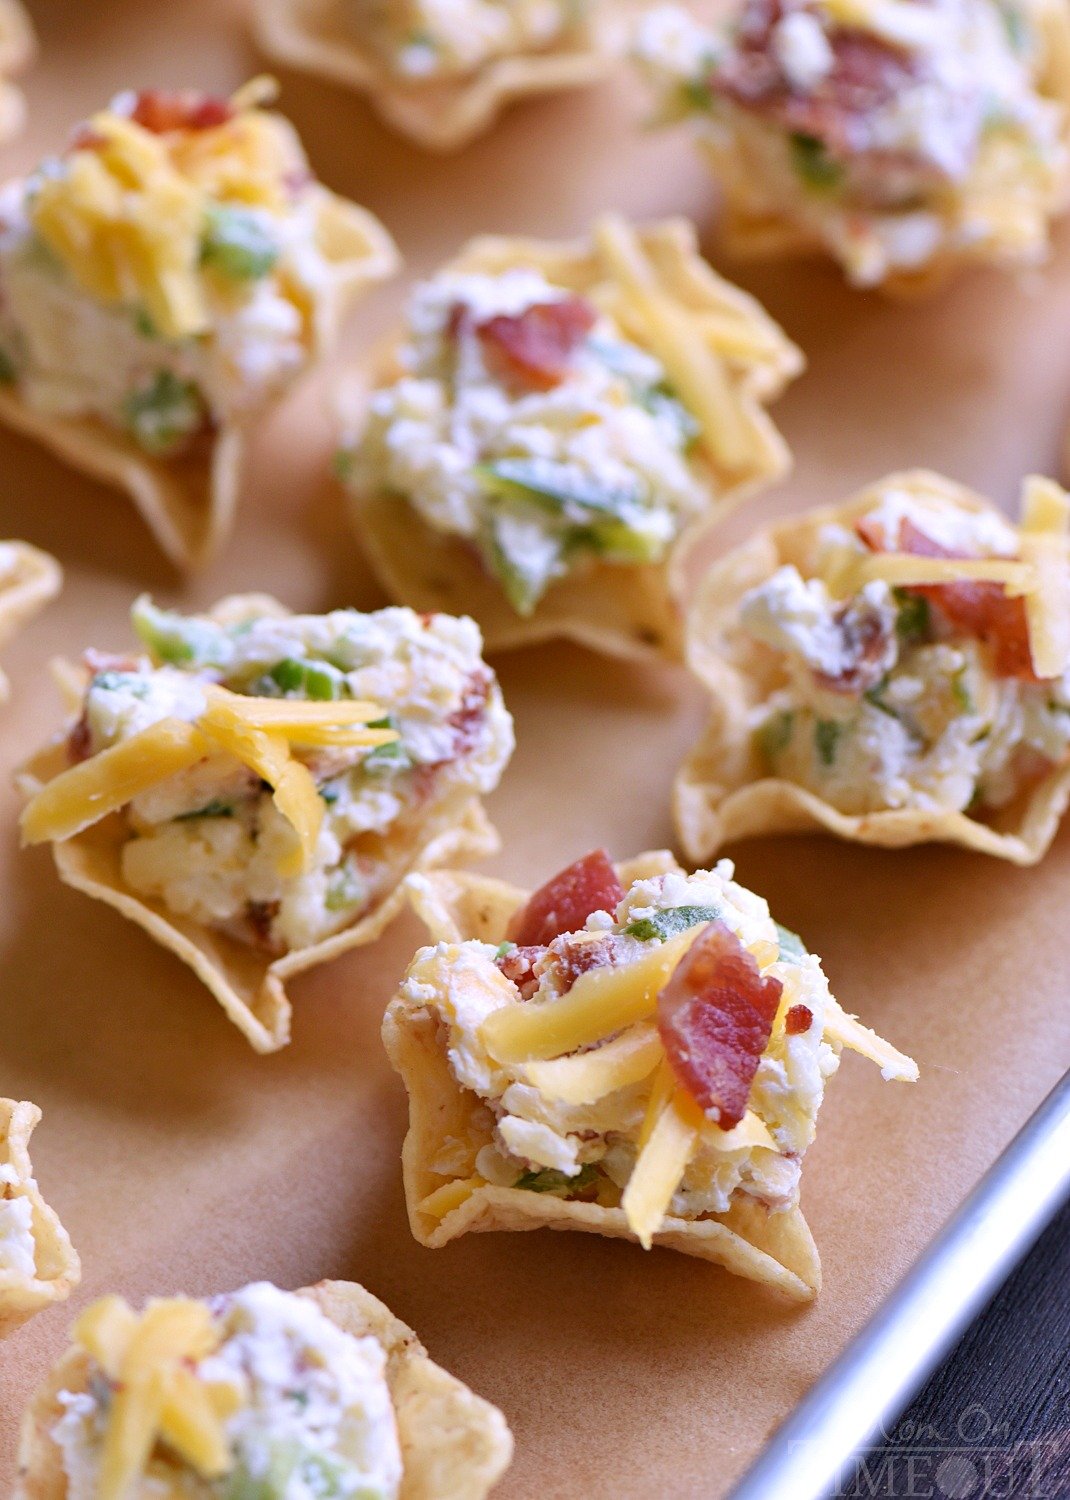 Easy Jalapeño Popper Bites are sure to be the hit of your party! This extra delicious appetizer is creamy, cheesy, spicy, bite-sized and did I mention loaded with bacon?? Make as many or few as you like!